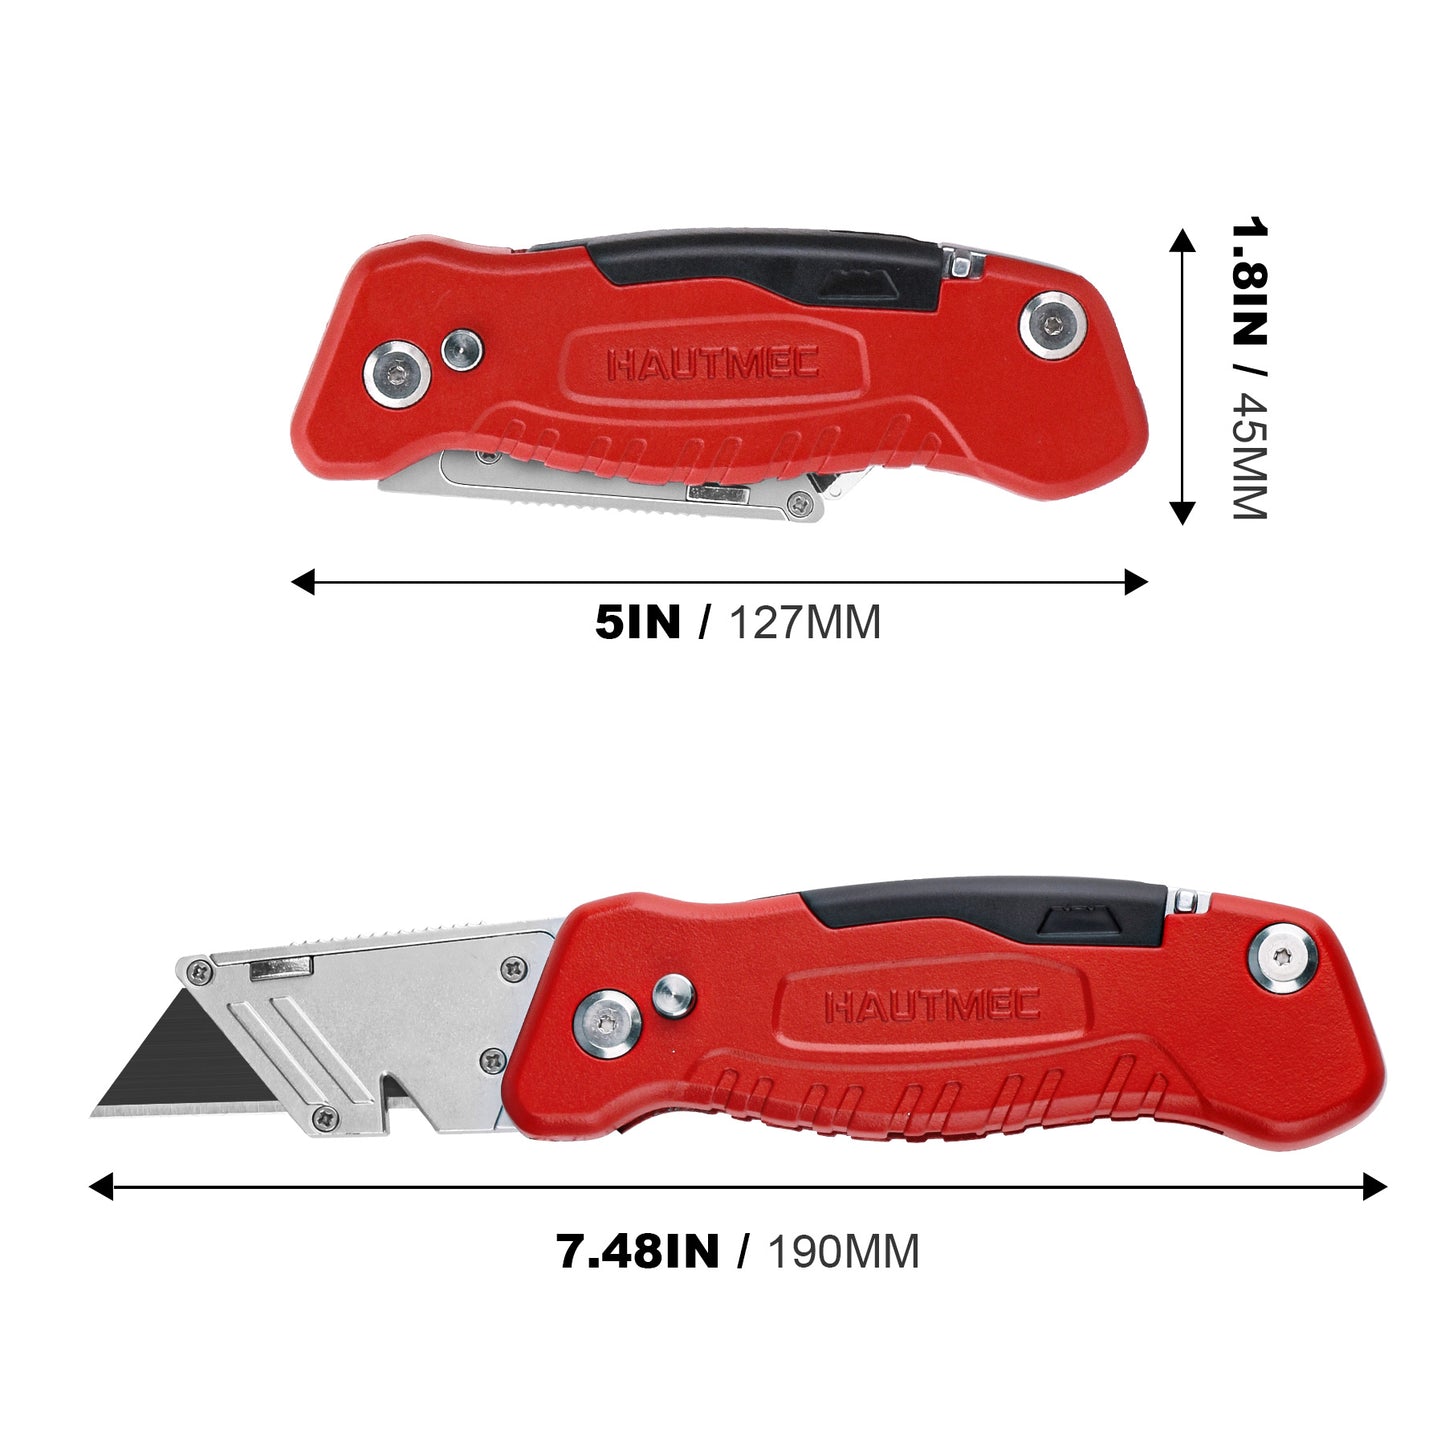 HAUTMEC Multifunctional Heavy Duty Folding Utility Knife With Integrated Screwdrivers, Box Cutter Built In Zinc Alloy Housing, 3 Extra Sharp Black SK4 Blades HT0294